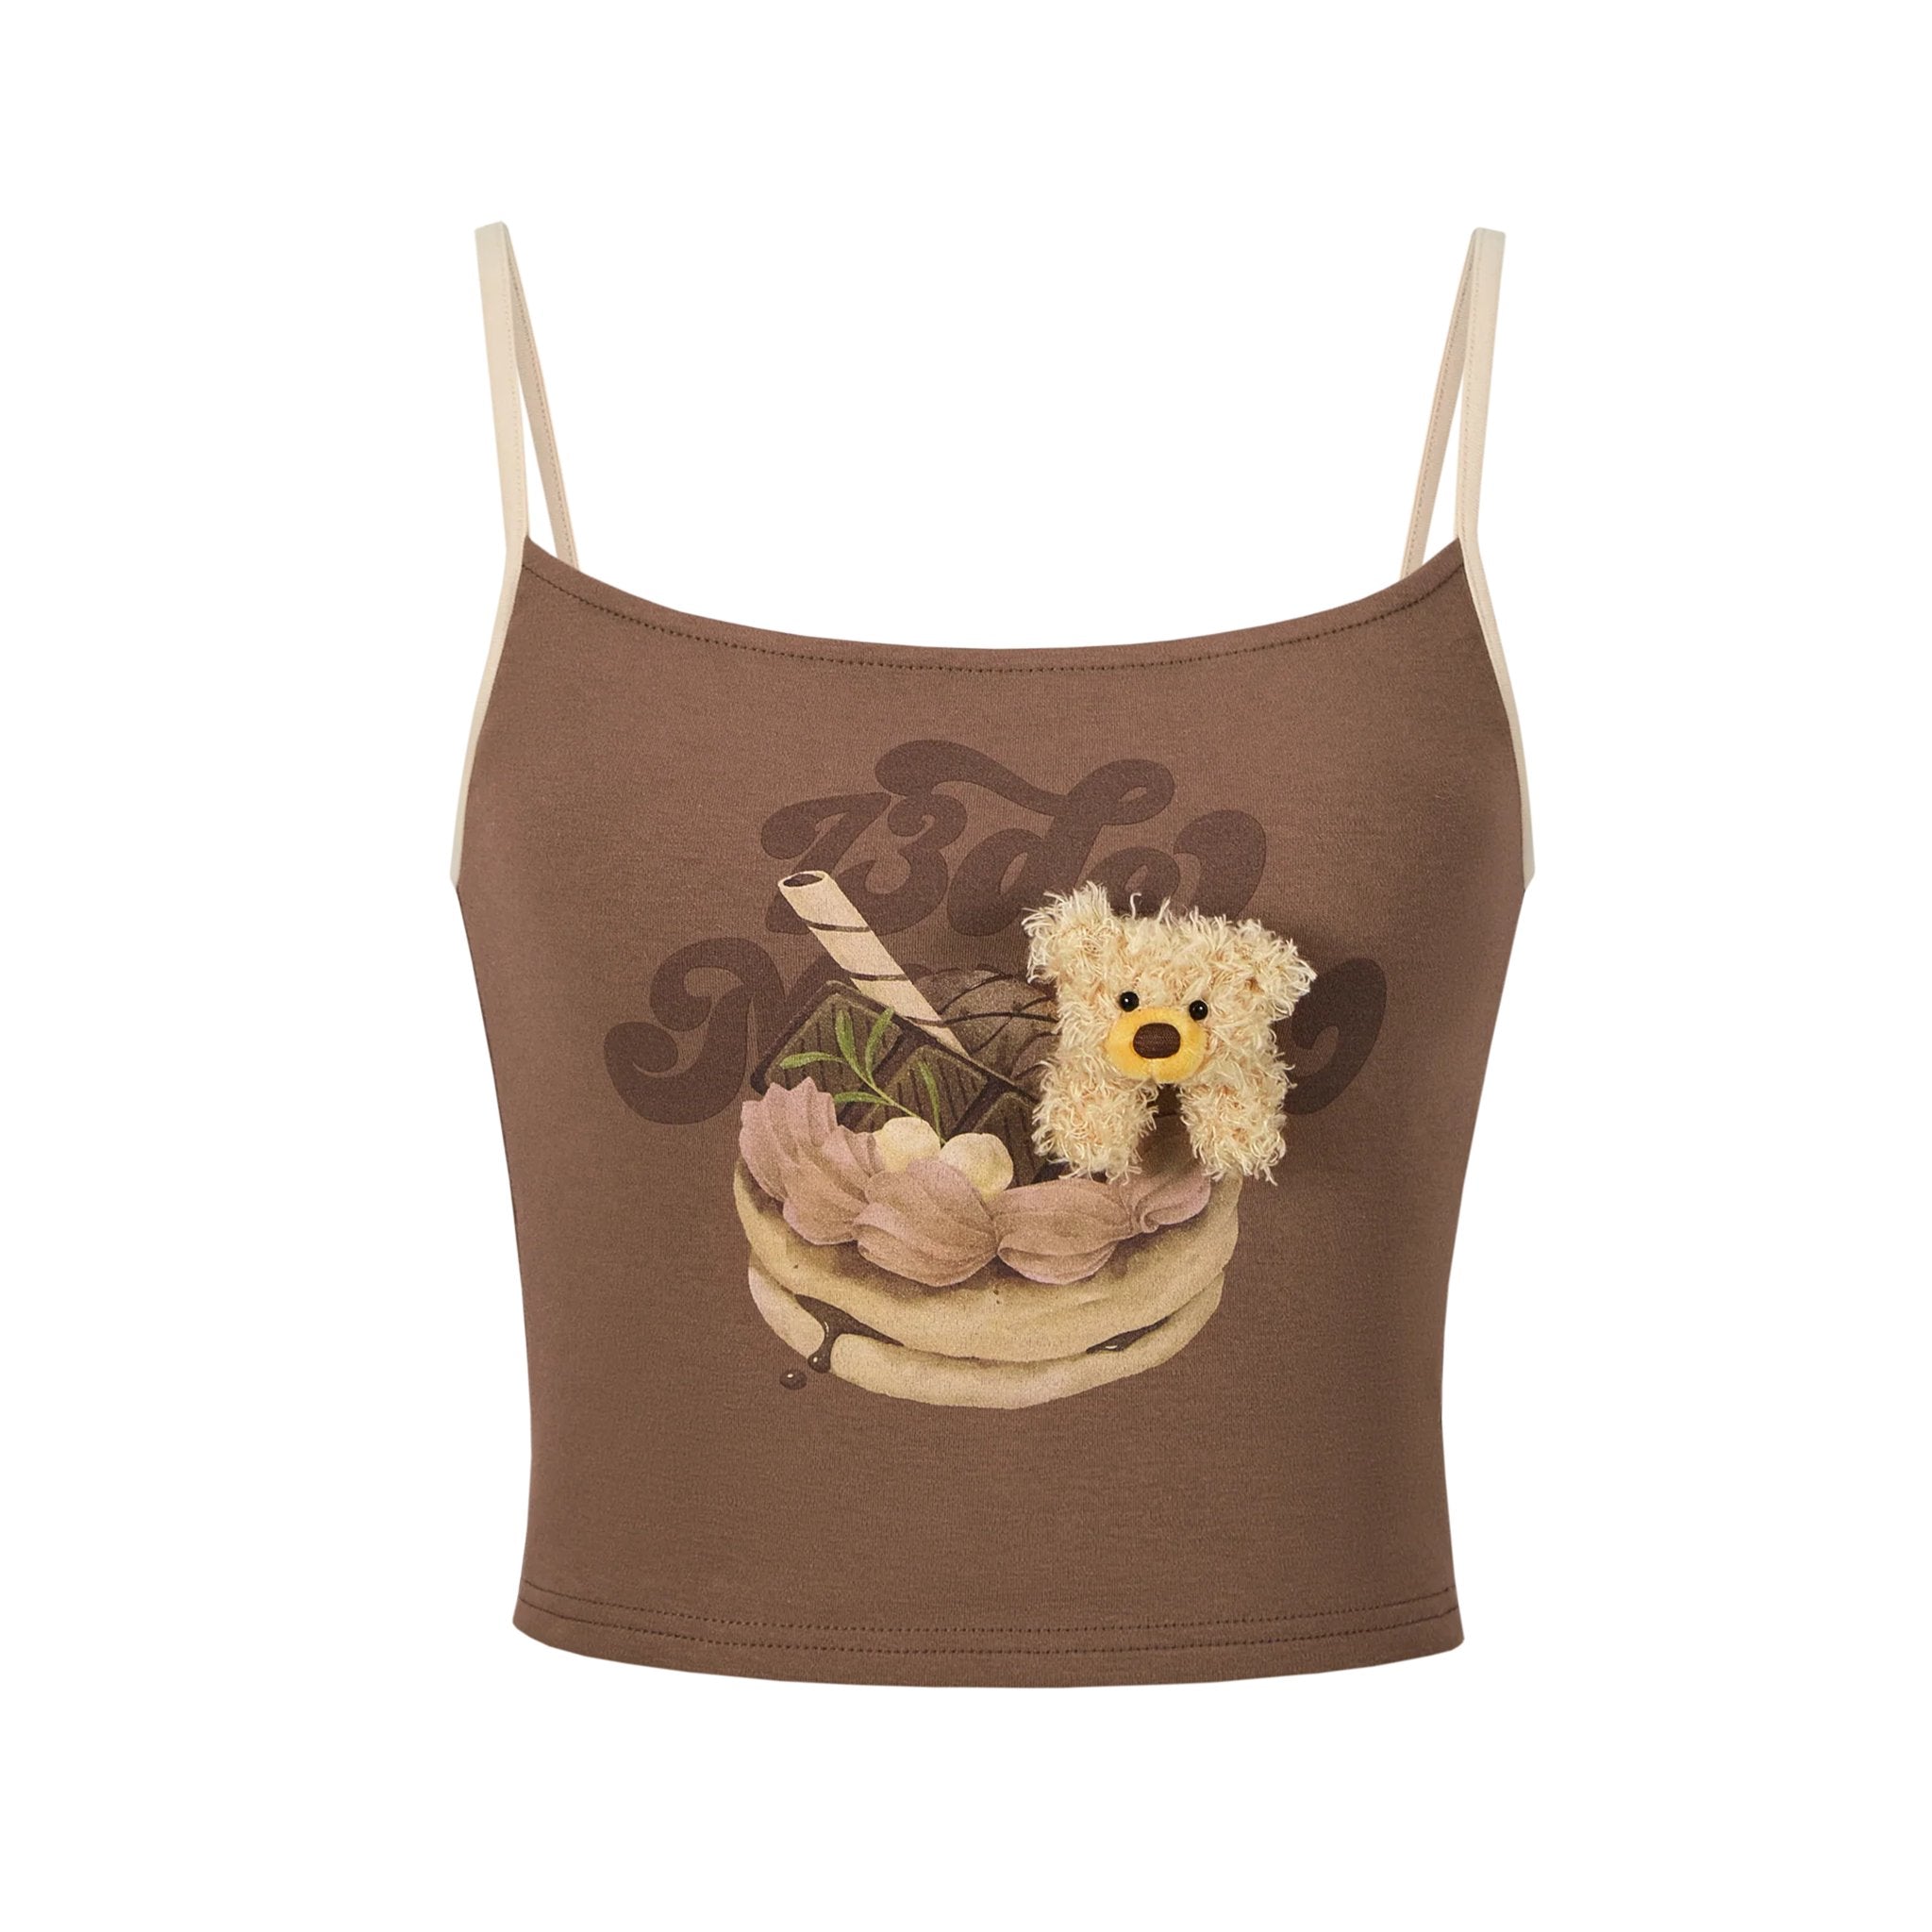 13DE MARZO Brown Flavor Cake Backless Camisole | MADA IN CHINA